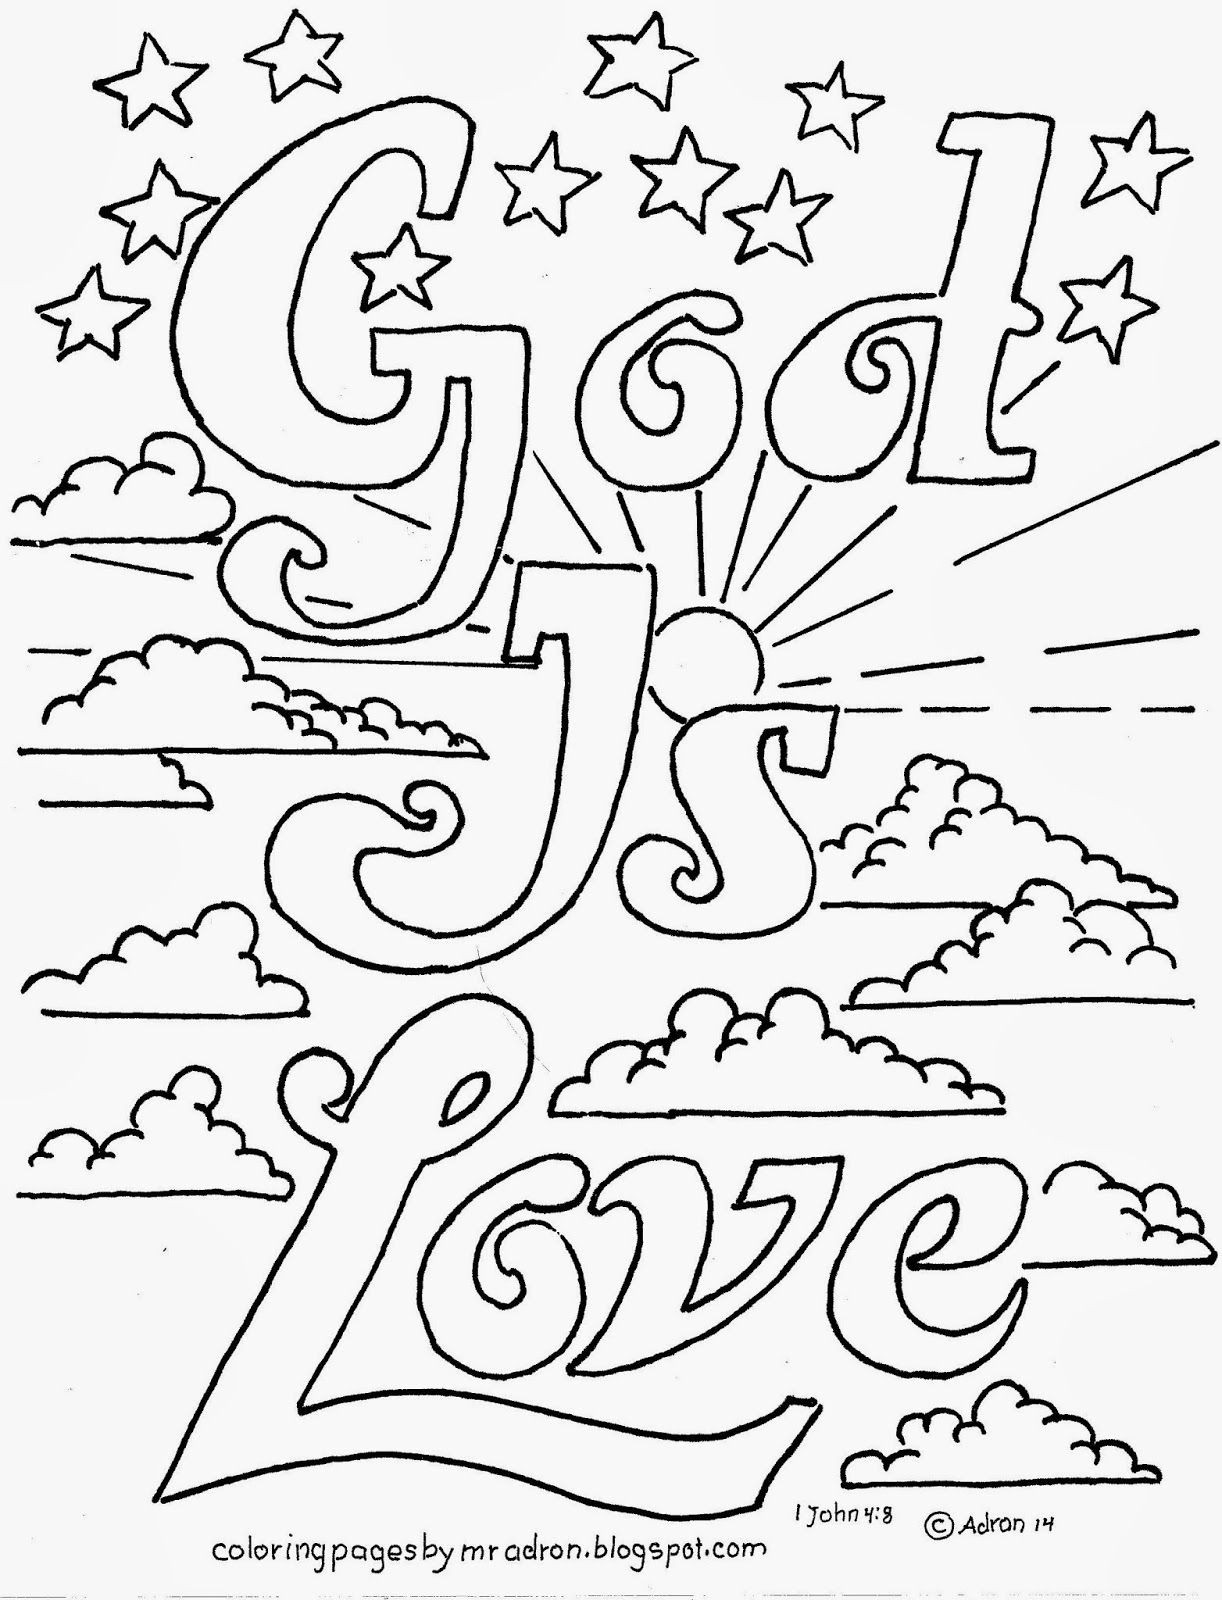 Free Printable Sunday School Coloring Pages
 Coloring Pages for Kids by Mr Adron God Is Love